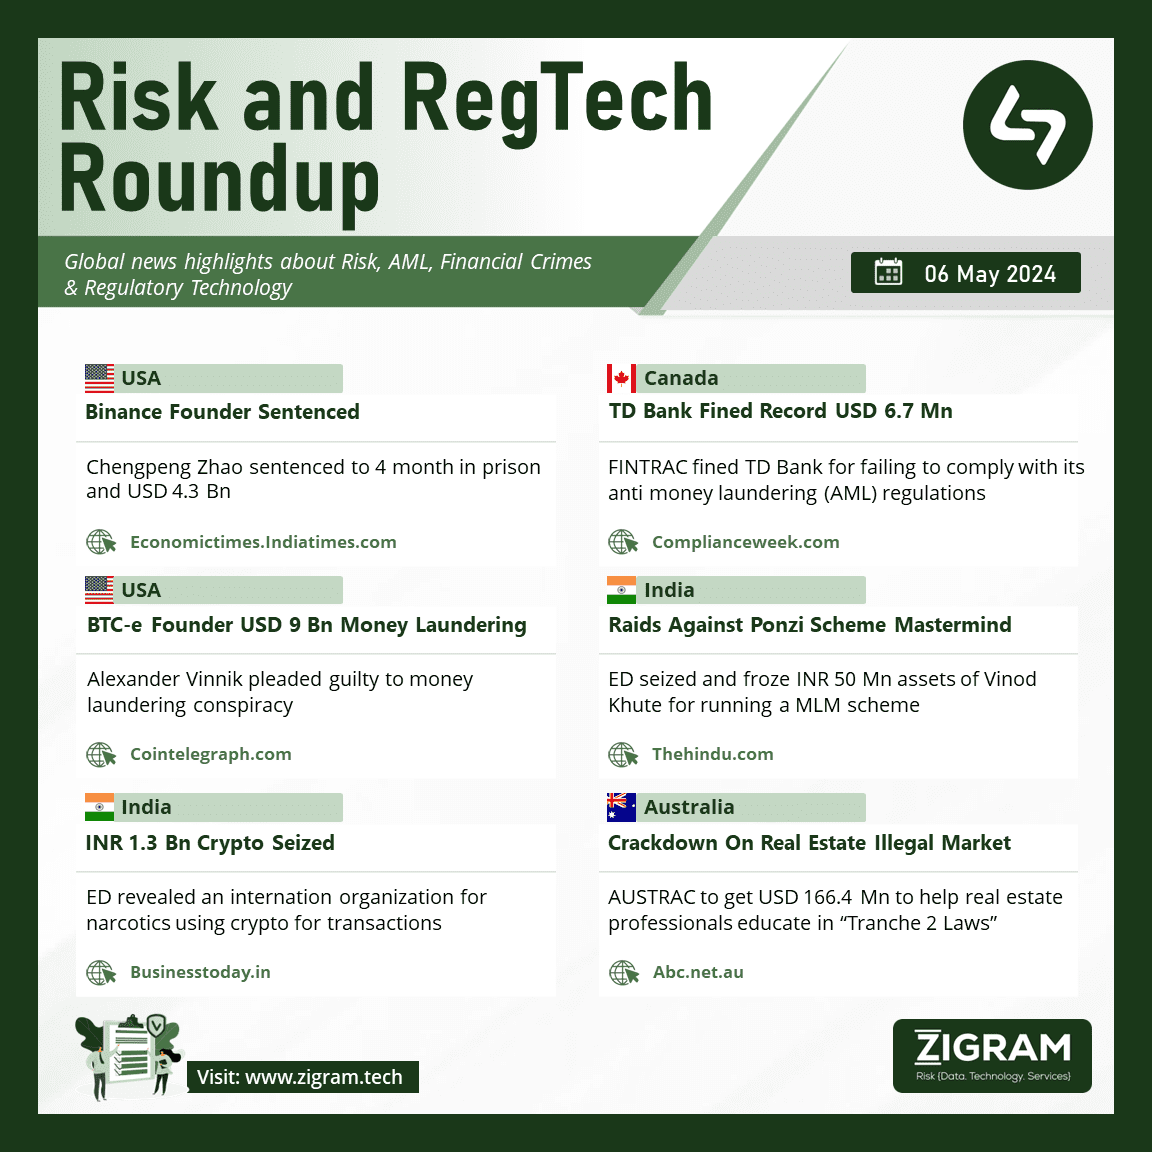 Risk and RegTech Roundup|29th April - 05th May 2024

To read more: zurl.co/ZVgq
Subscribe to our newsletter:  zurl.co/nD81

#Binance #Fintrac #AML #BTCE #ED #PonziScheme #MoneyLaundering #RealEstate #CryptocurrencySeizure #DrugTrafficking